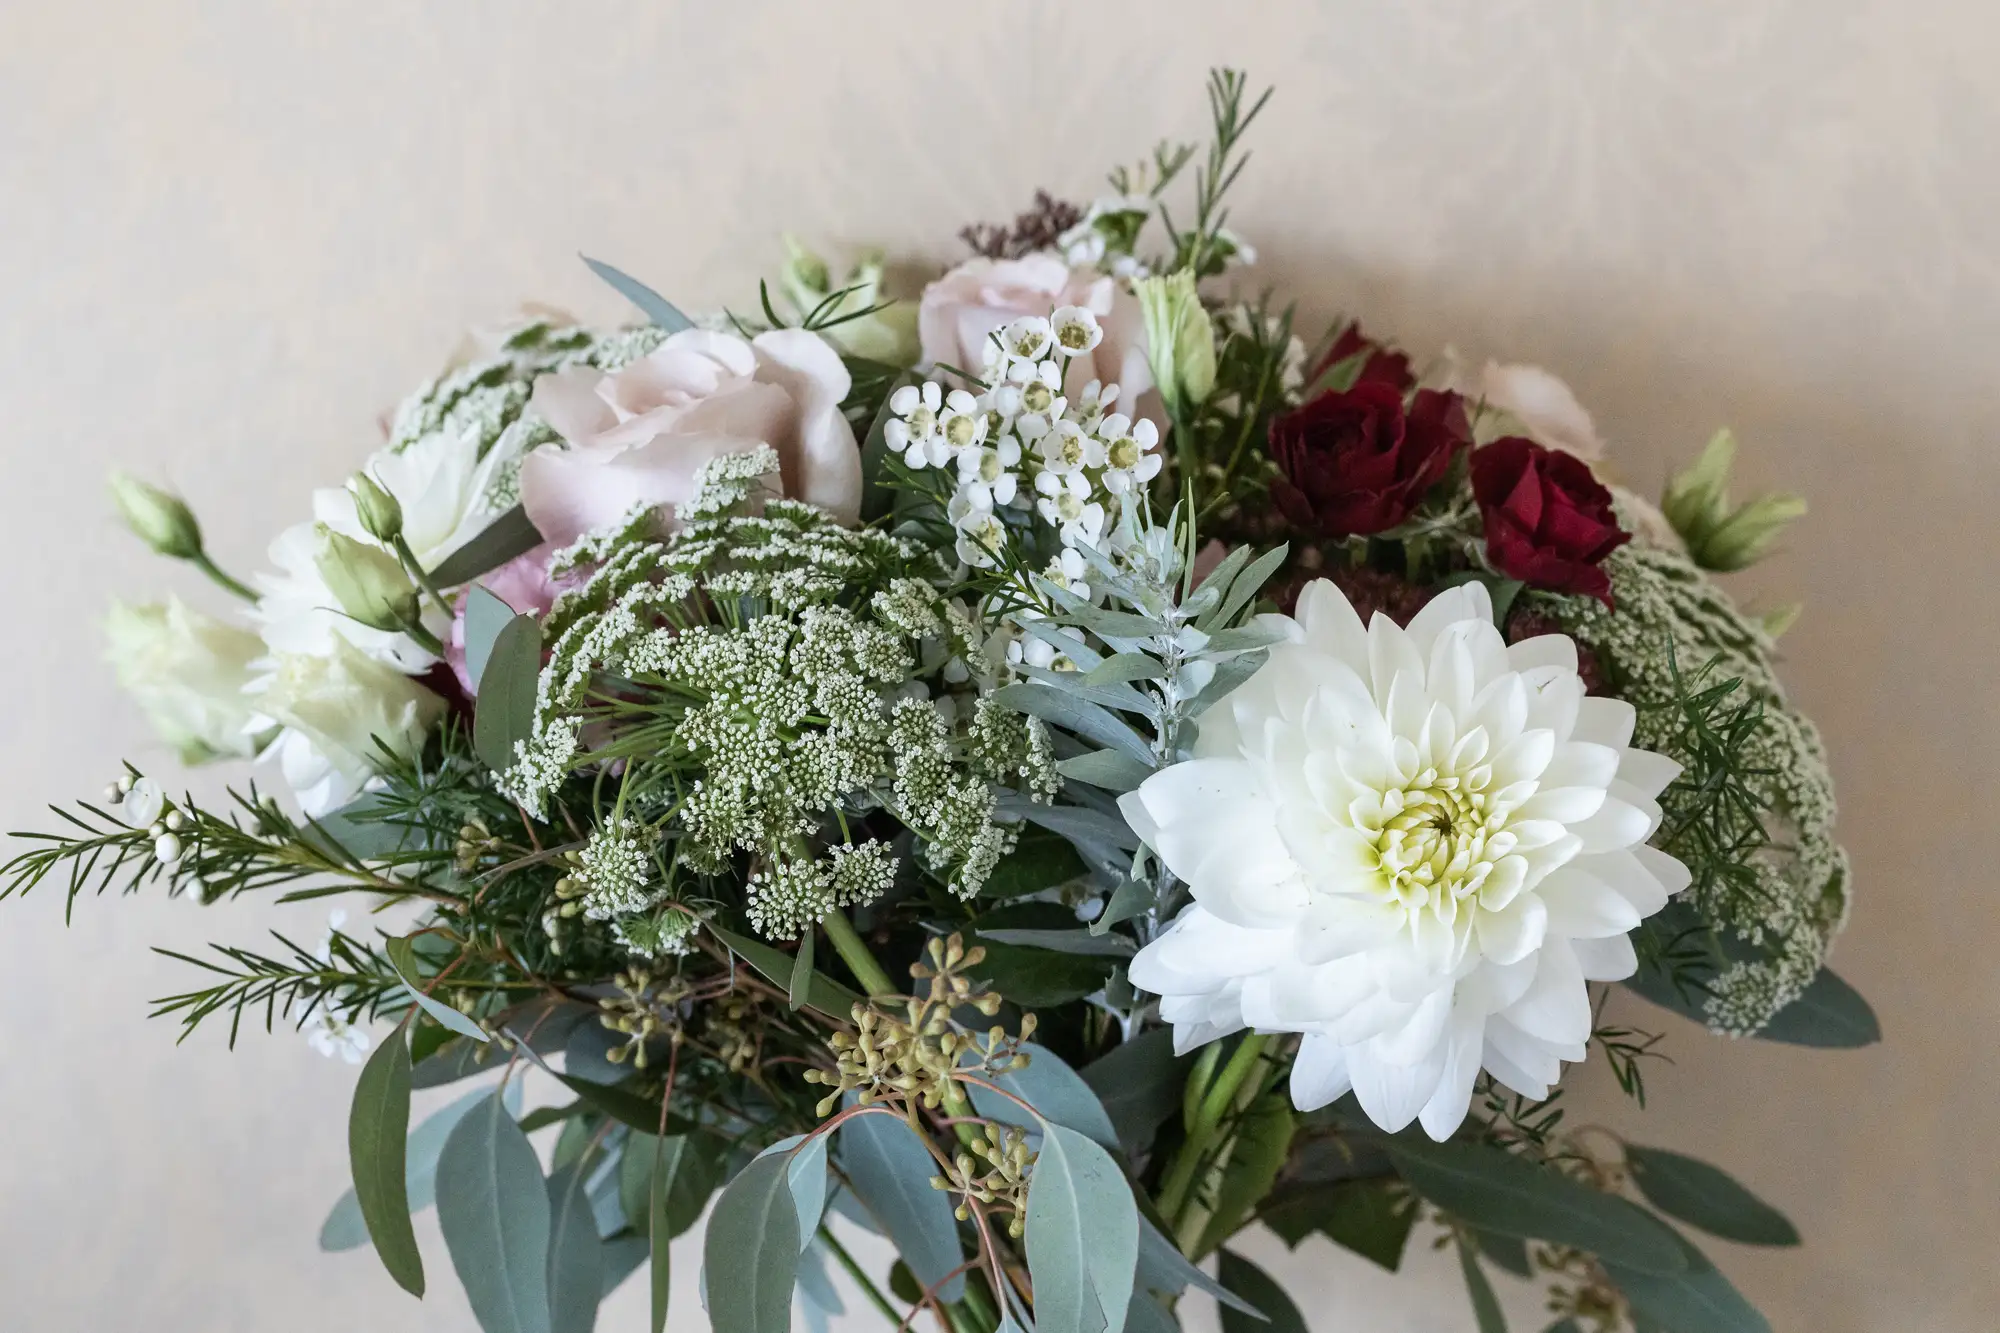 A floral arrangement featuring white dahlias, deep red roses, pink blooms, baby's breath, and various greenery on a light textured background.